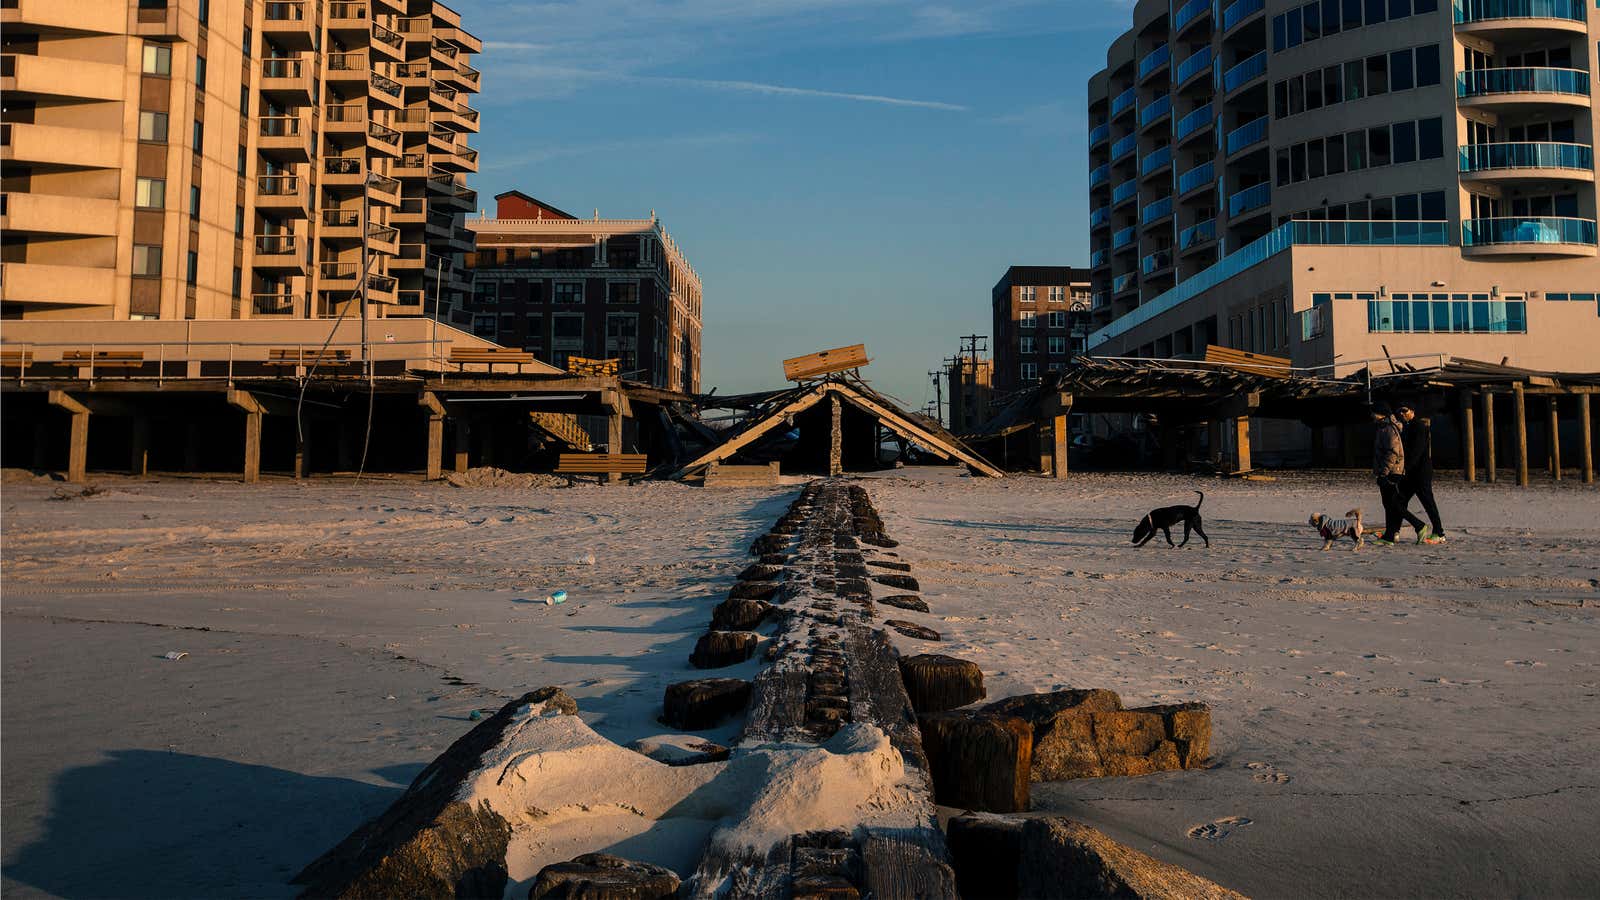 Hurricane Sandy had a devastating effect on beaches and the business around them.